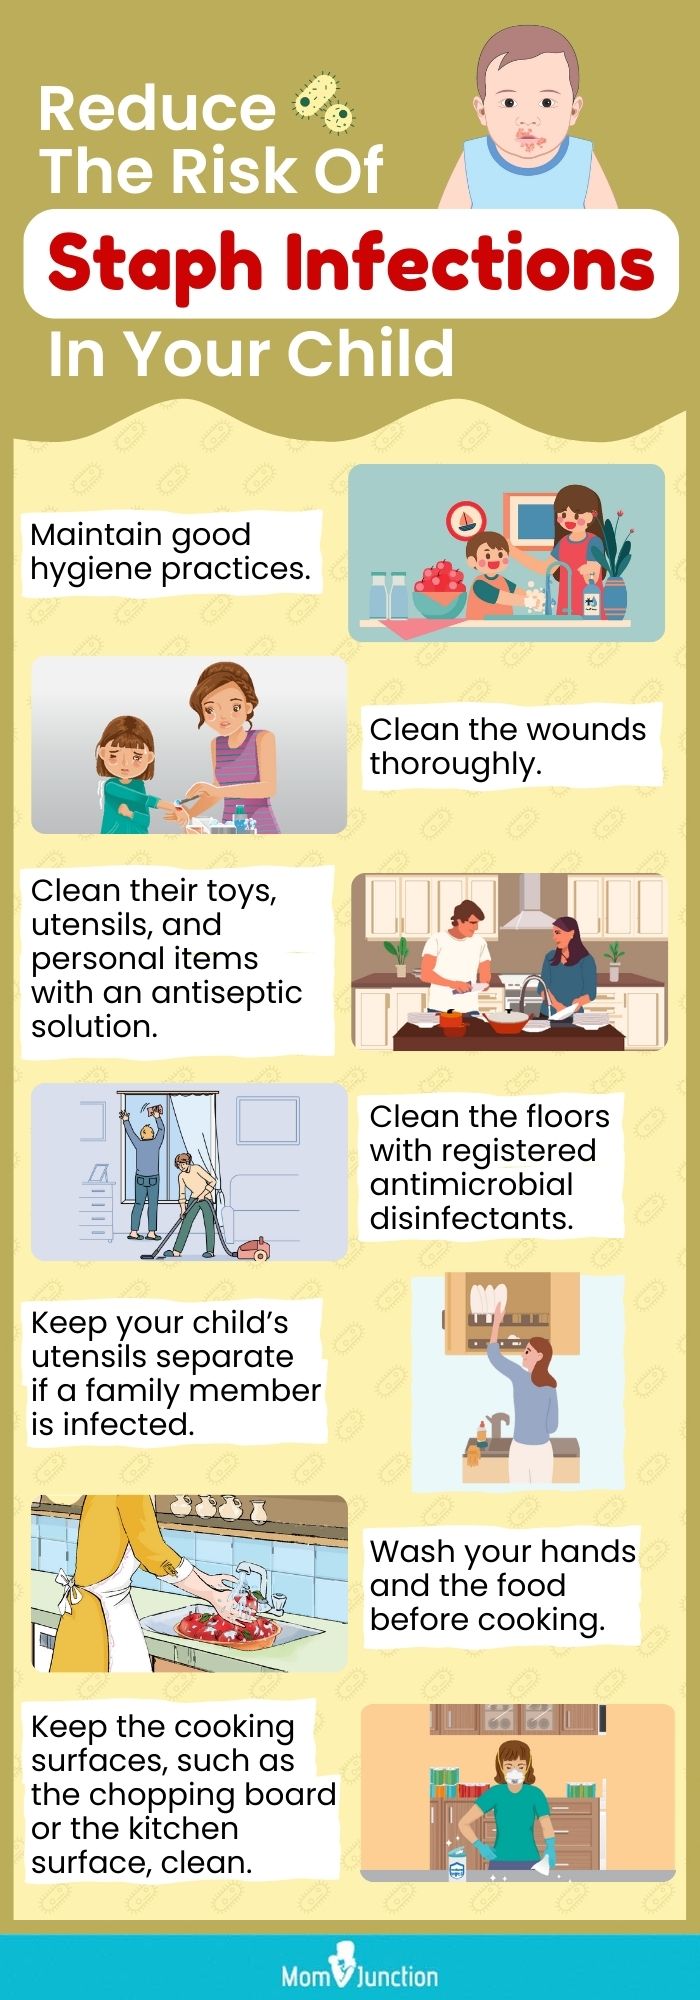 reduce the risk of staph infections in your child (infographic)